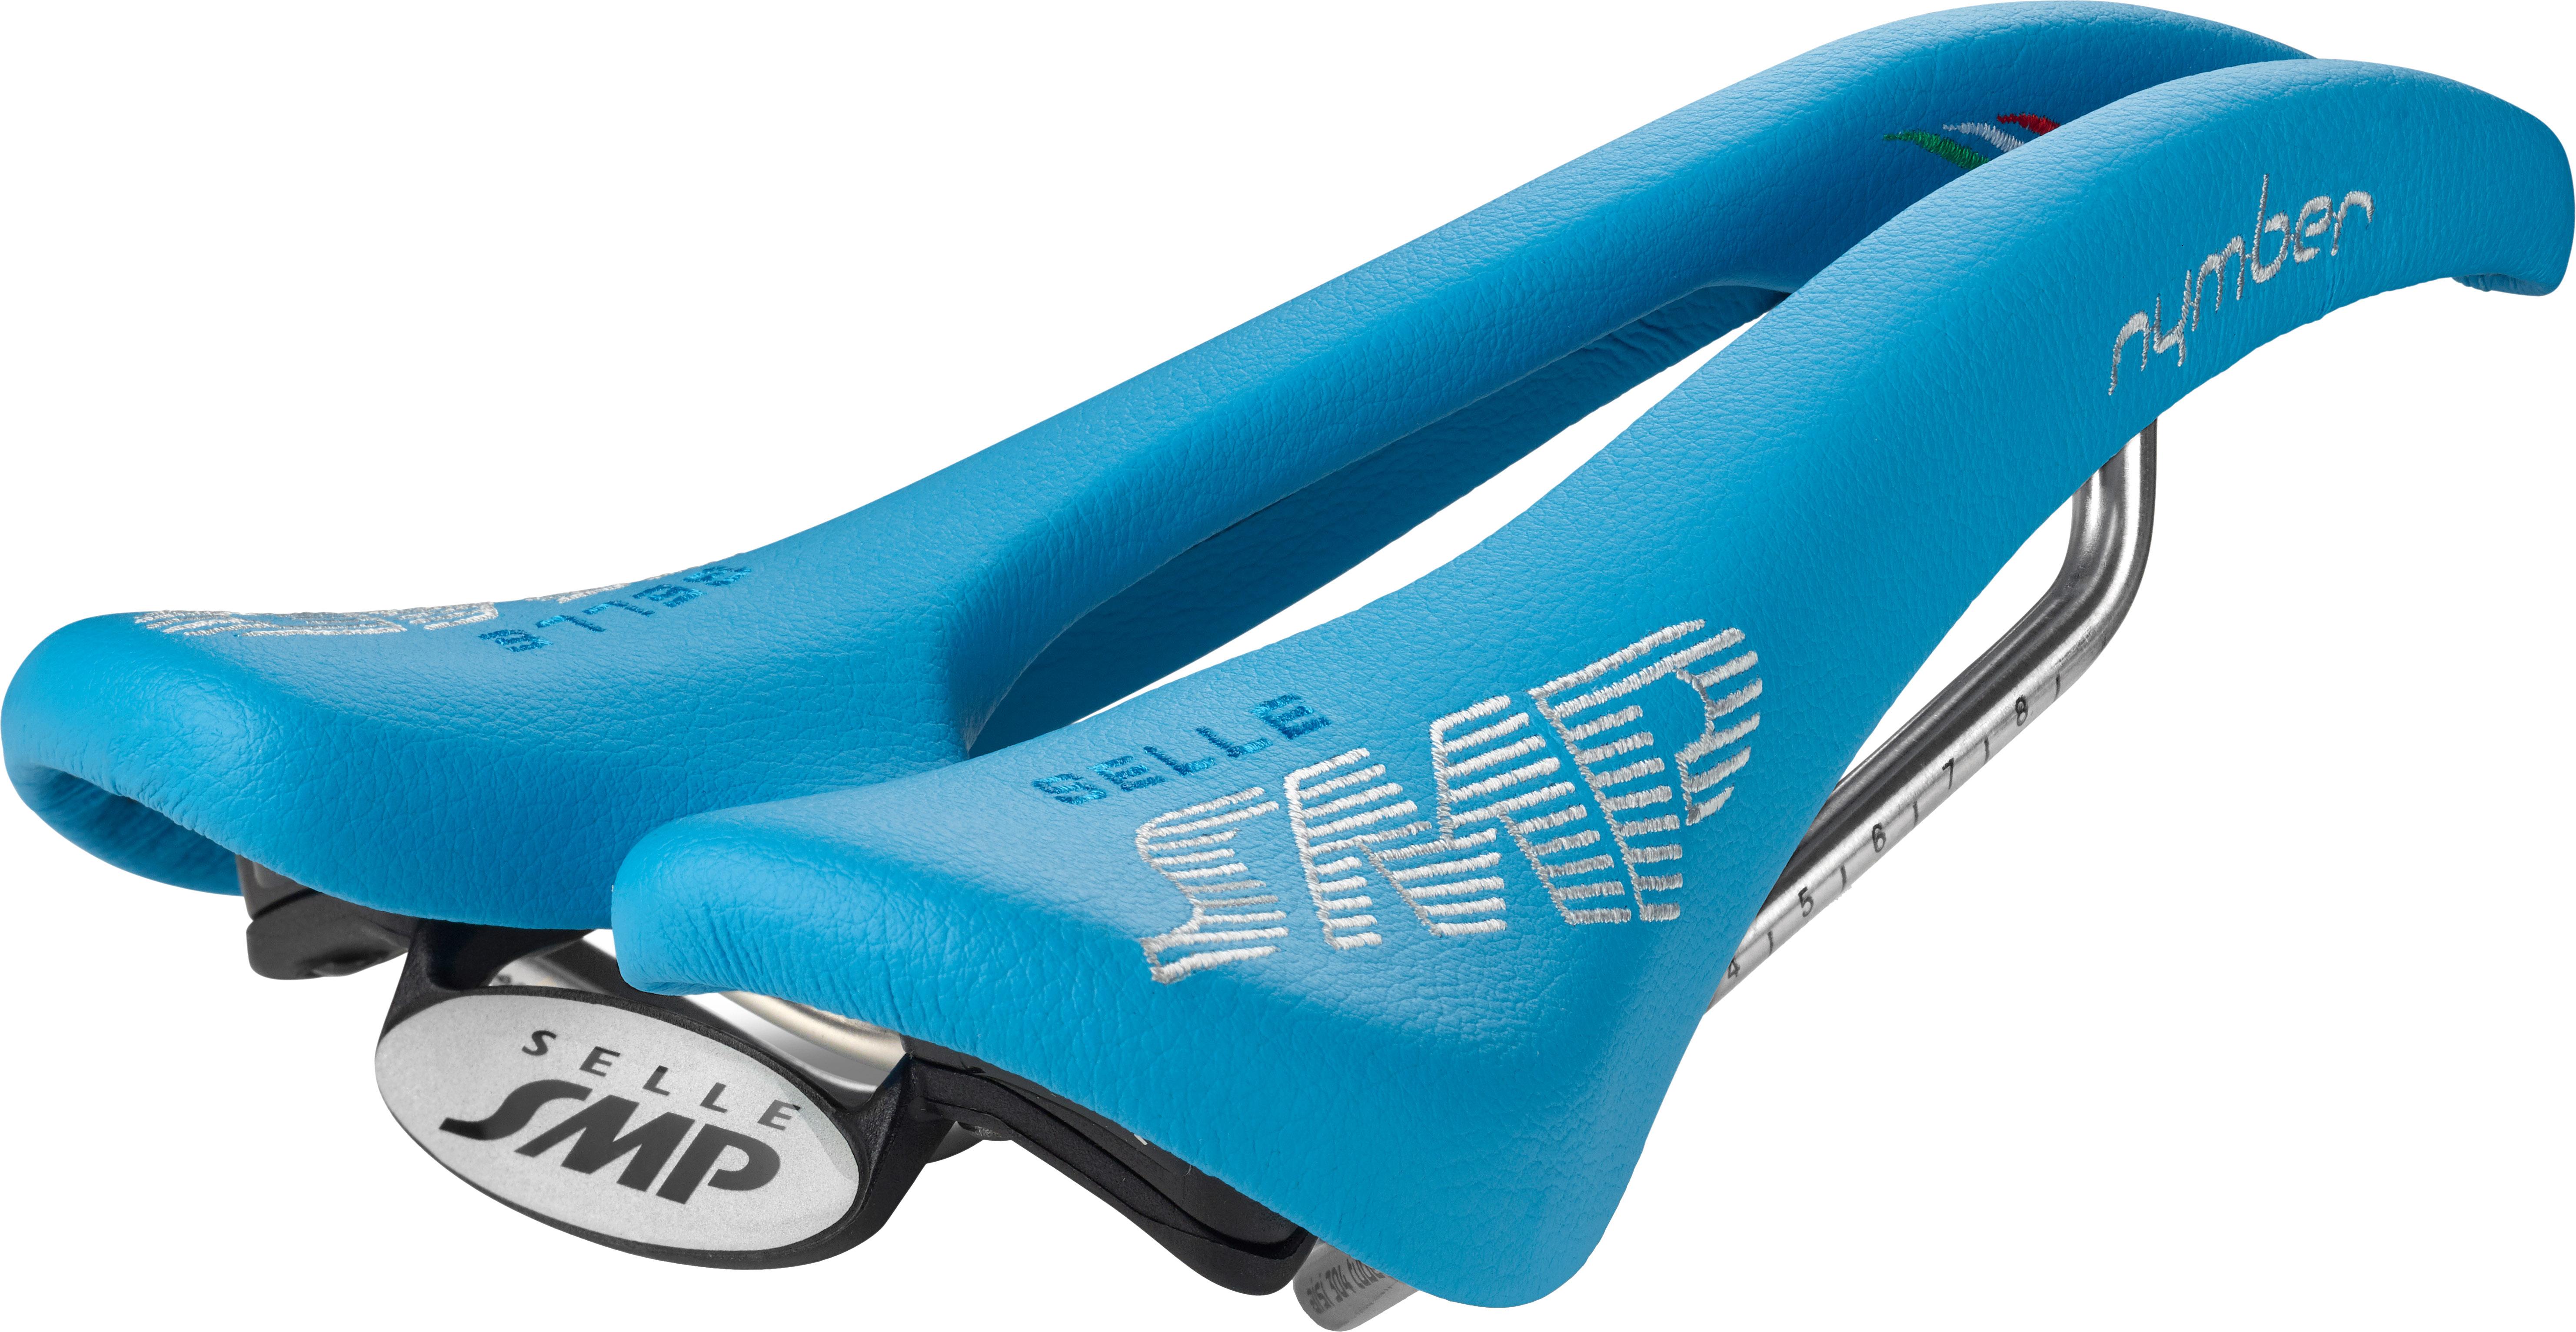 Selle Smp Nymber Saddle - Light Blue